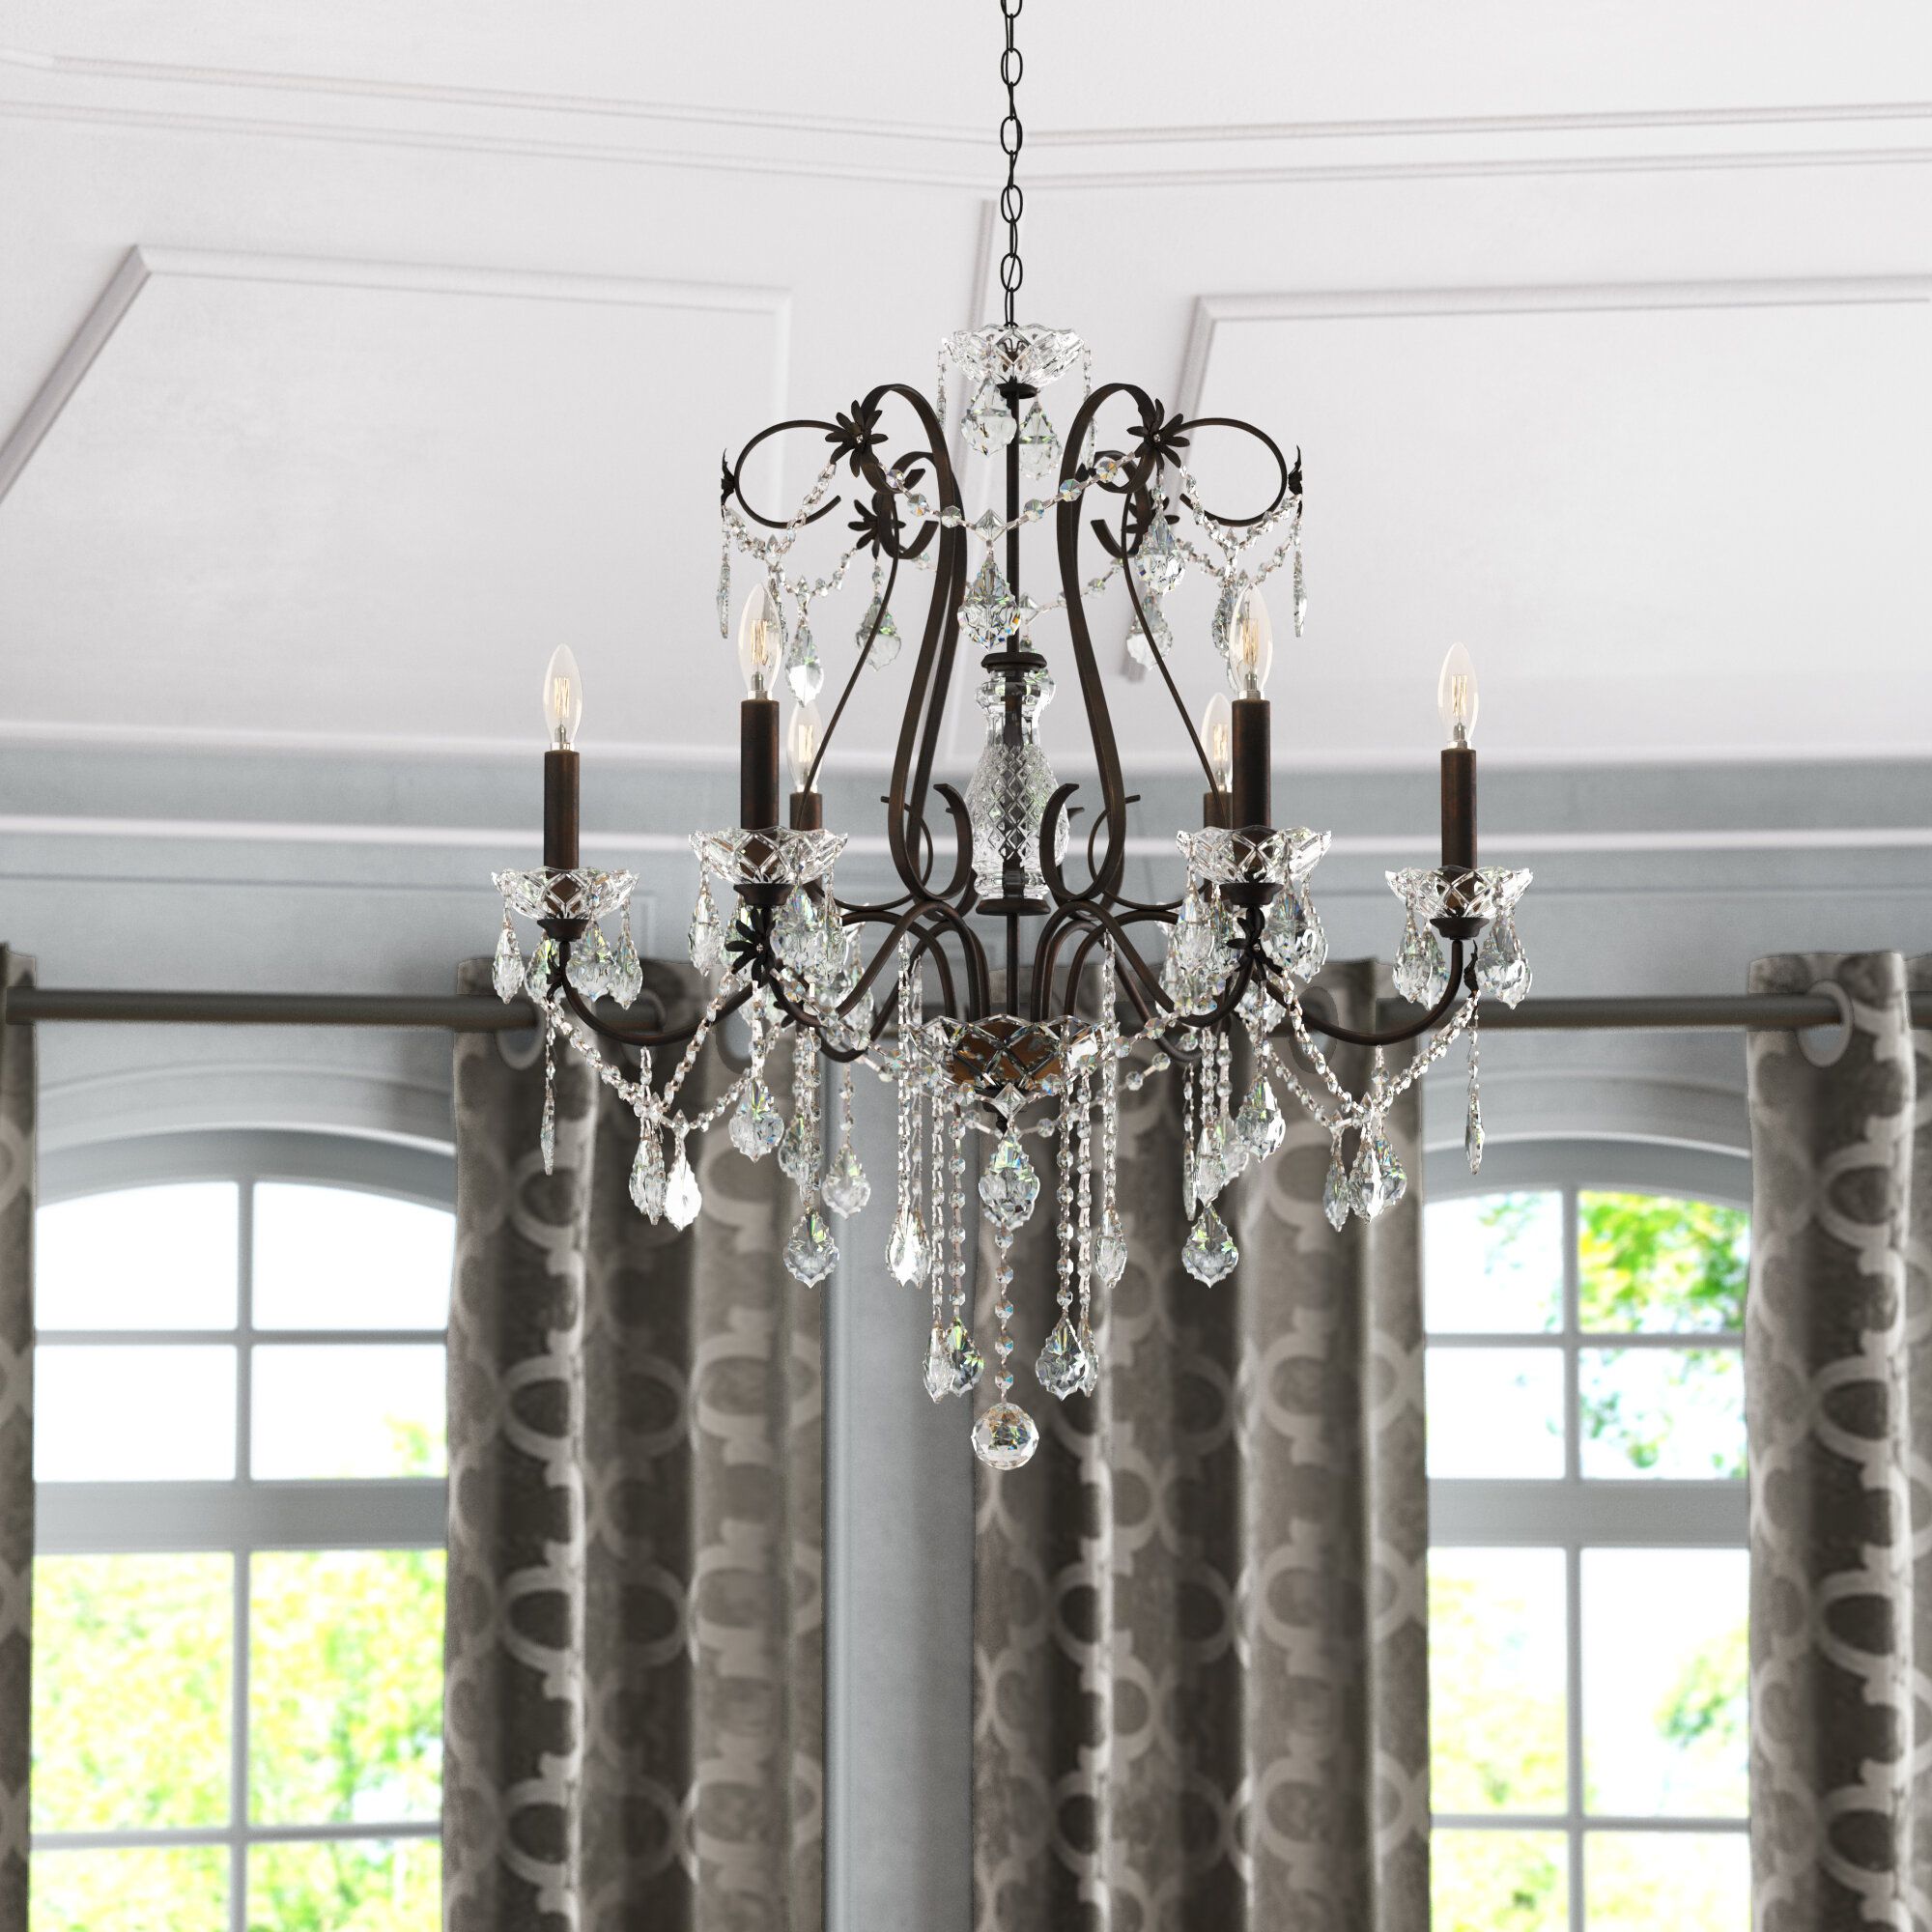 Thao 6 Light Candle Style Chandelier In Hesse 5 Light Candle Style Chandeliers (View 27 of 30)